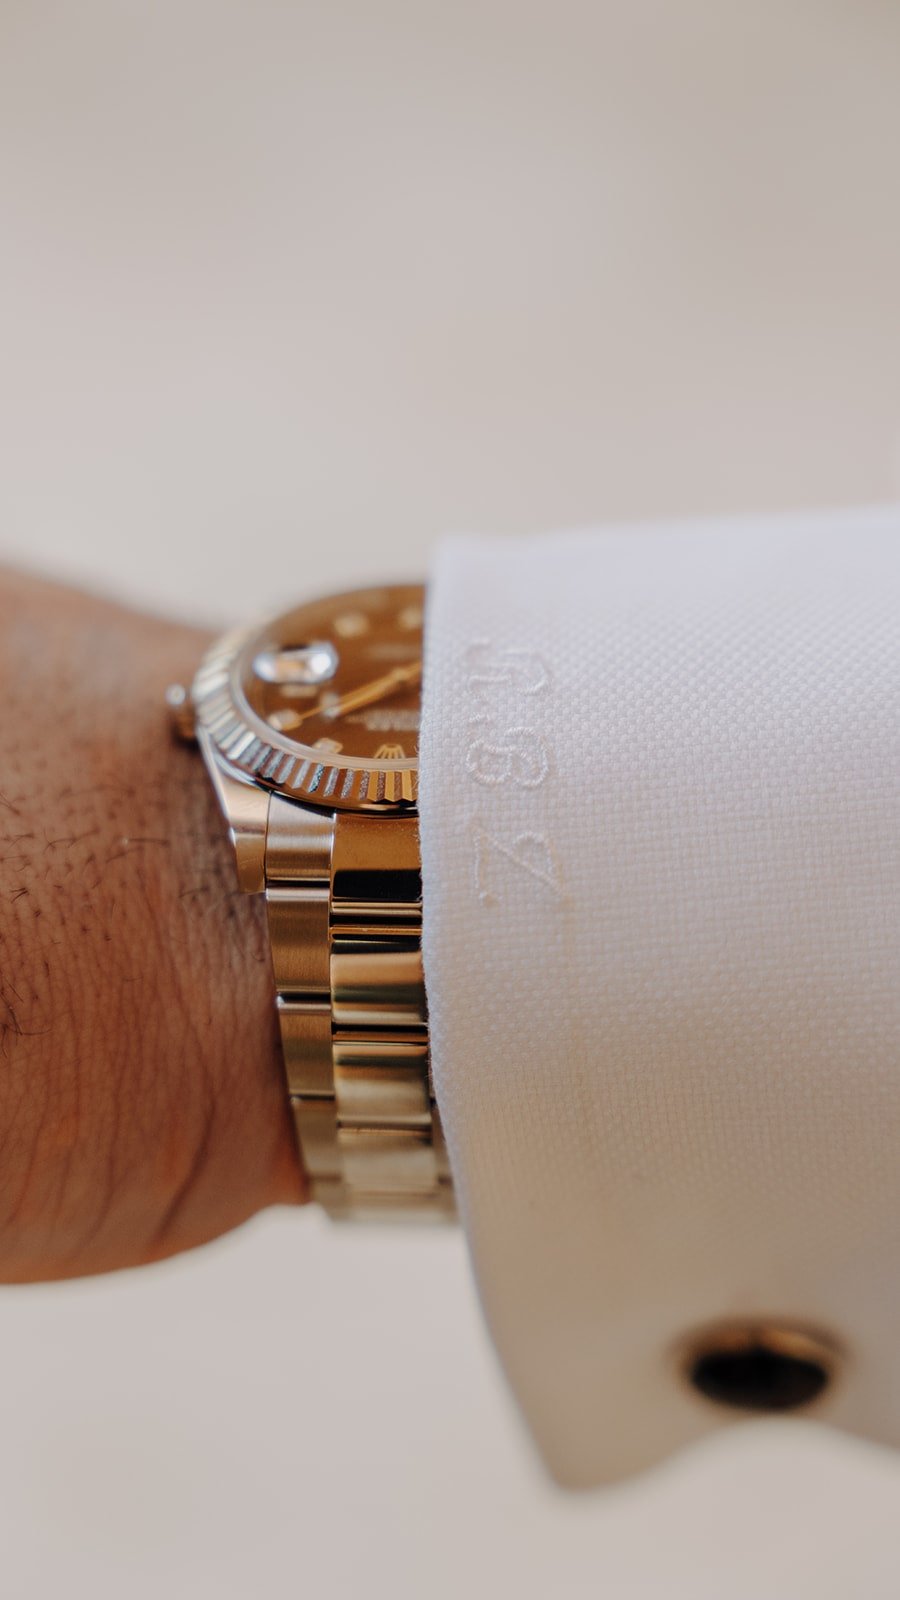 Luxury groom wedding details with customized dress shirt with black cuff links and rolex watch